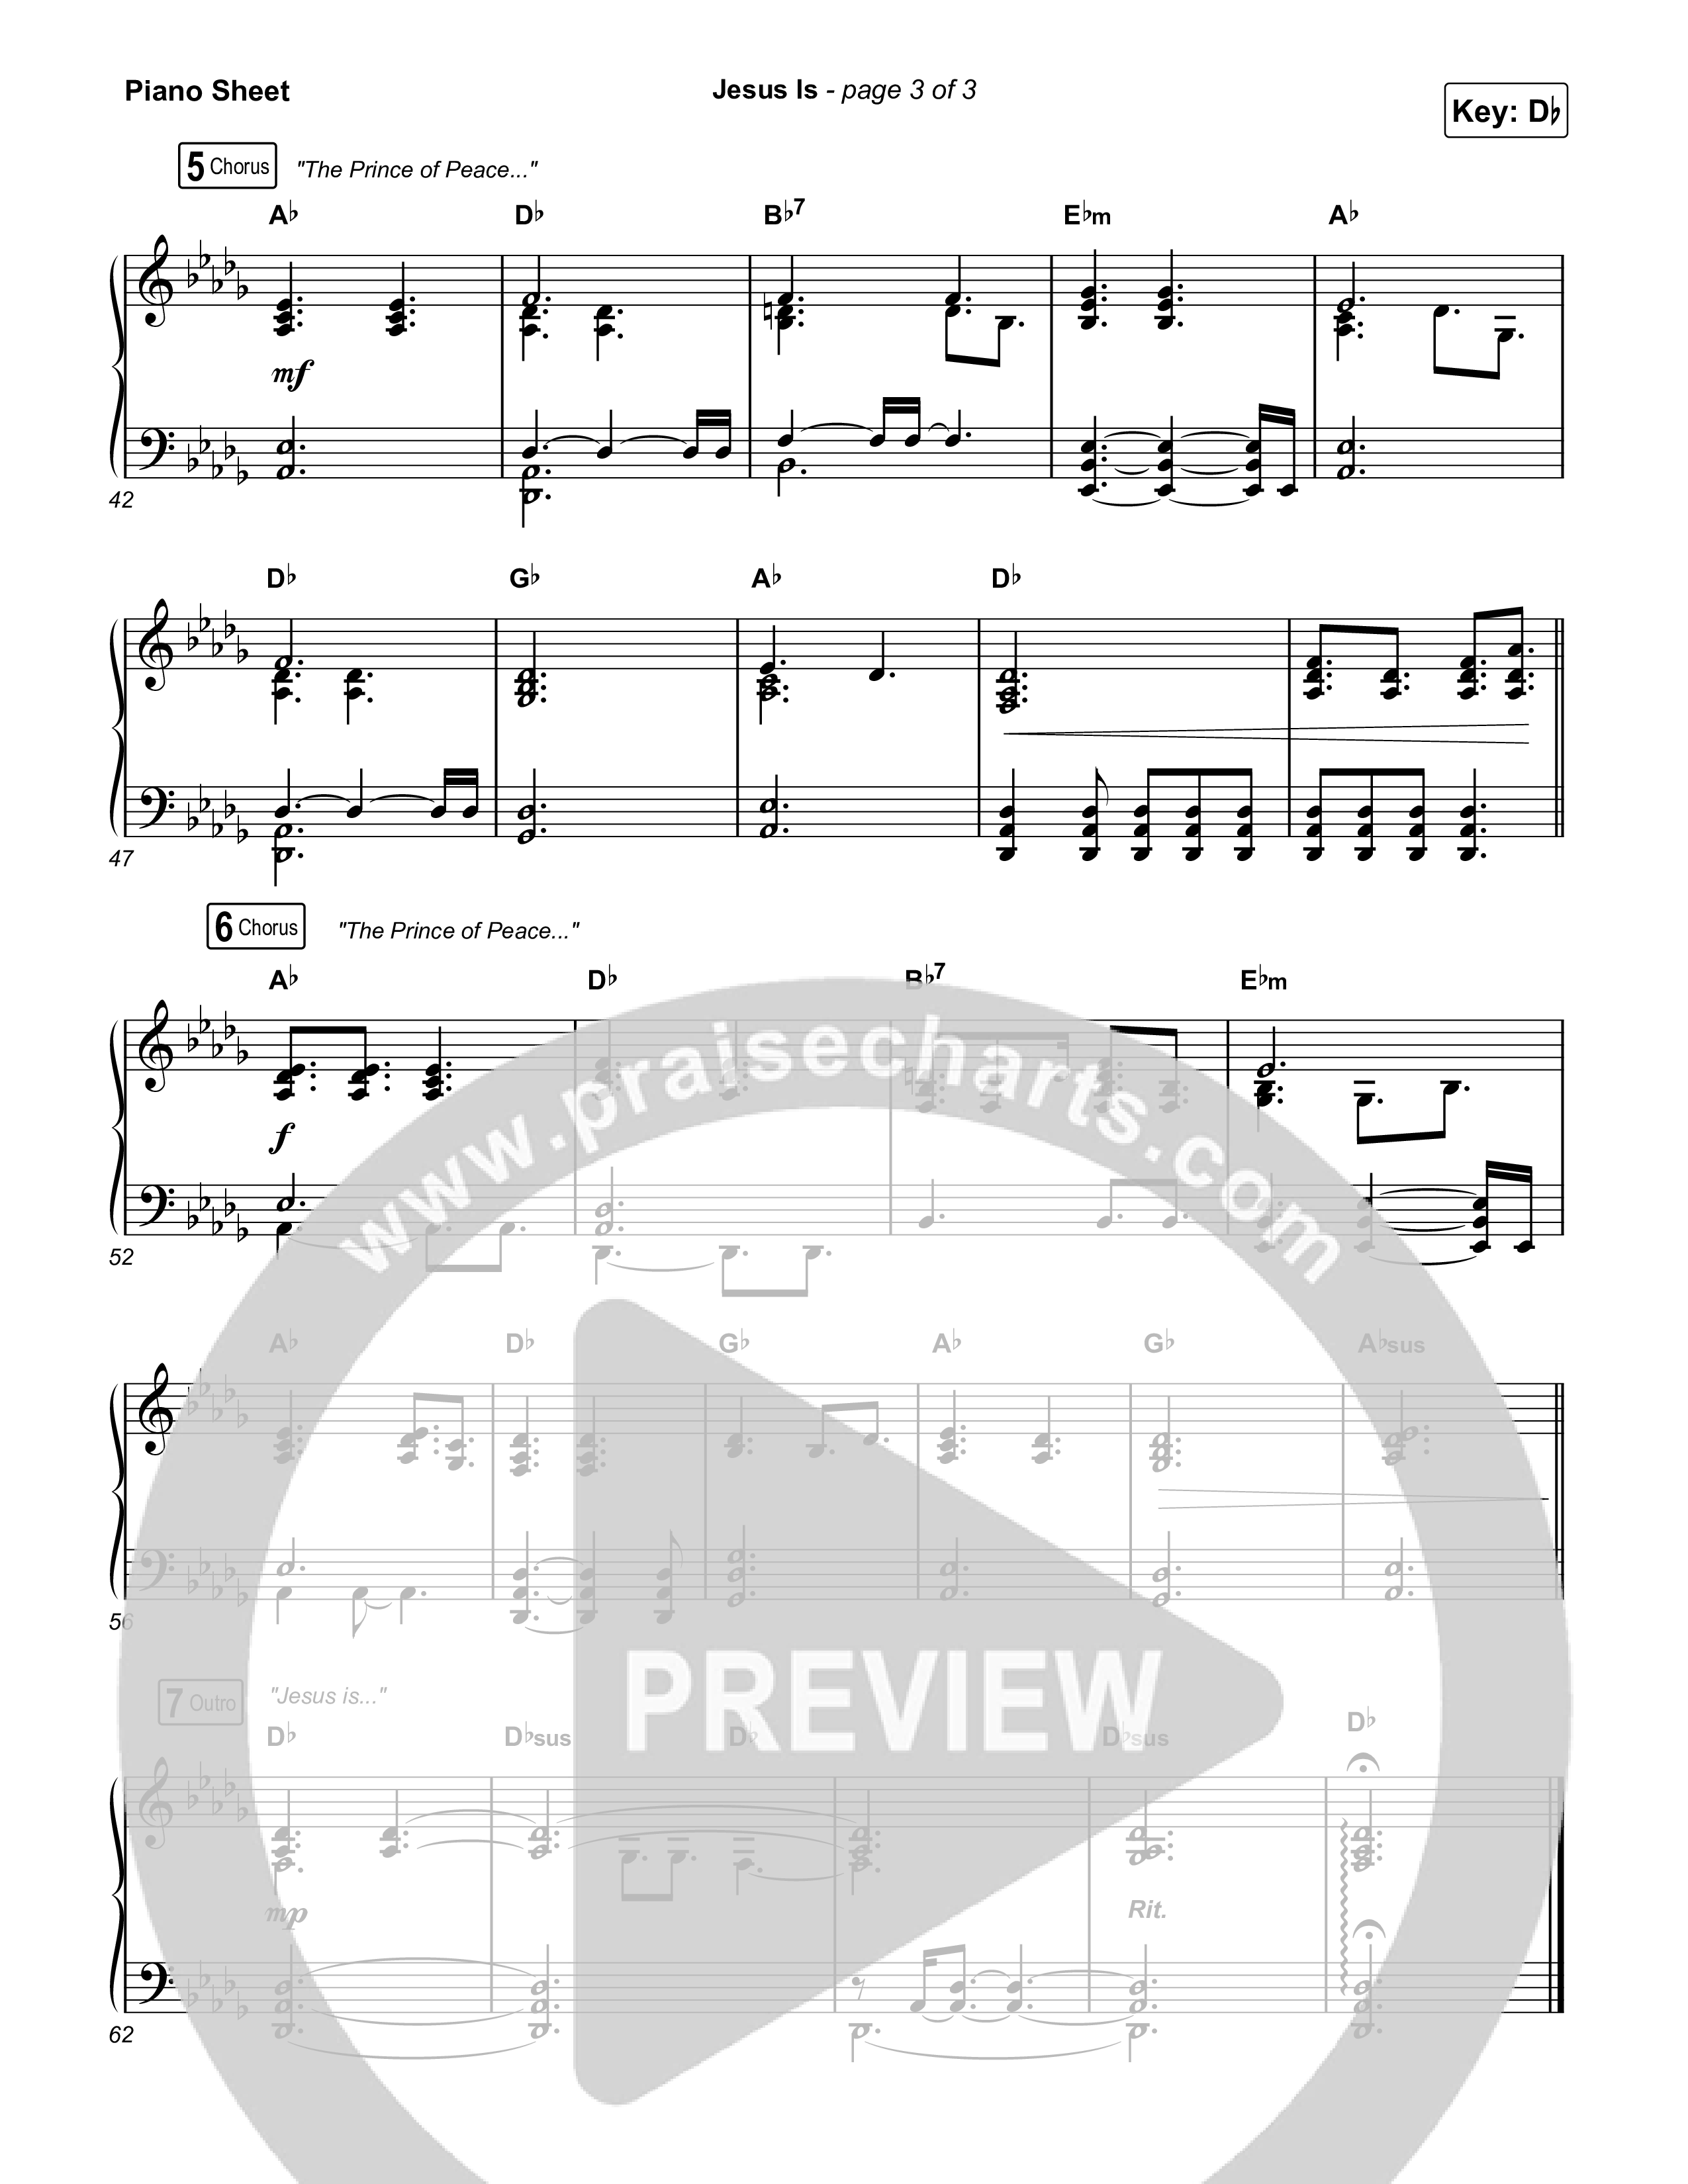 Jesus Is Piano Sheet (Leanna Crawford)